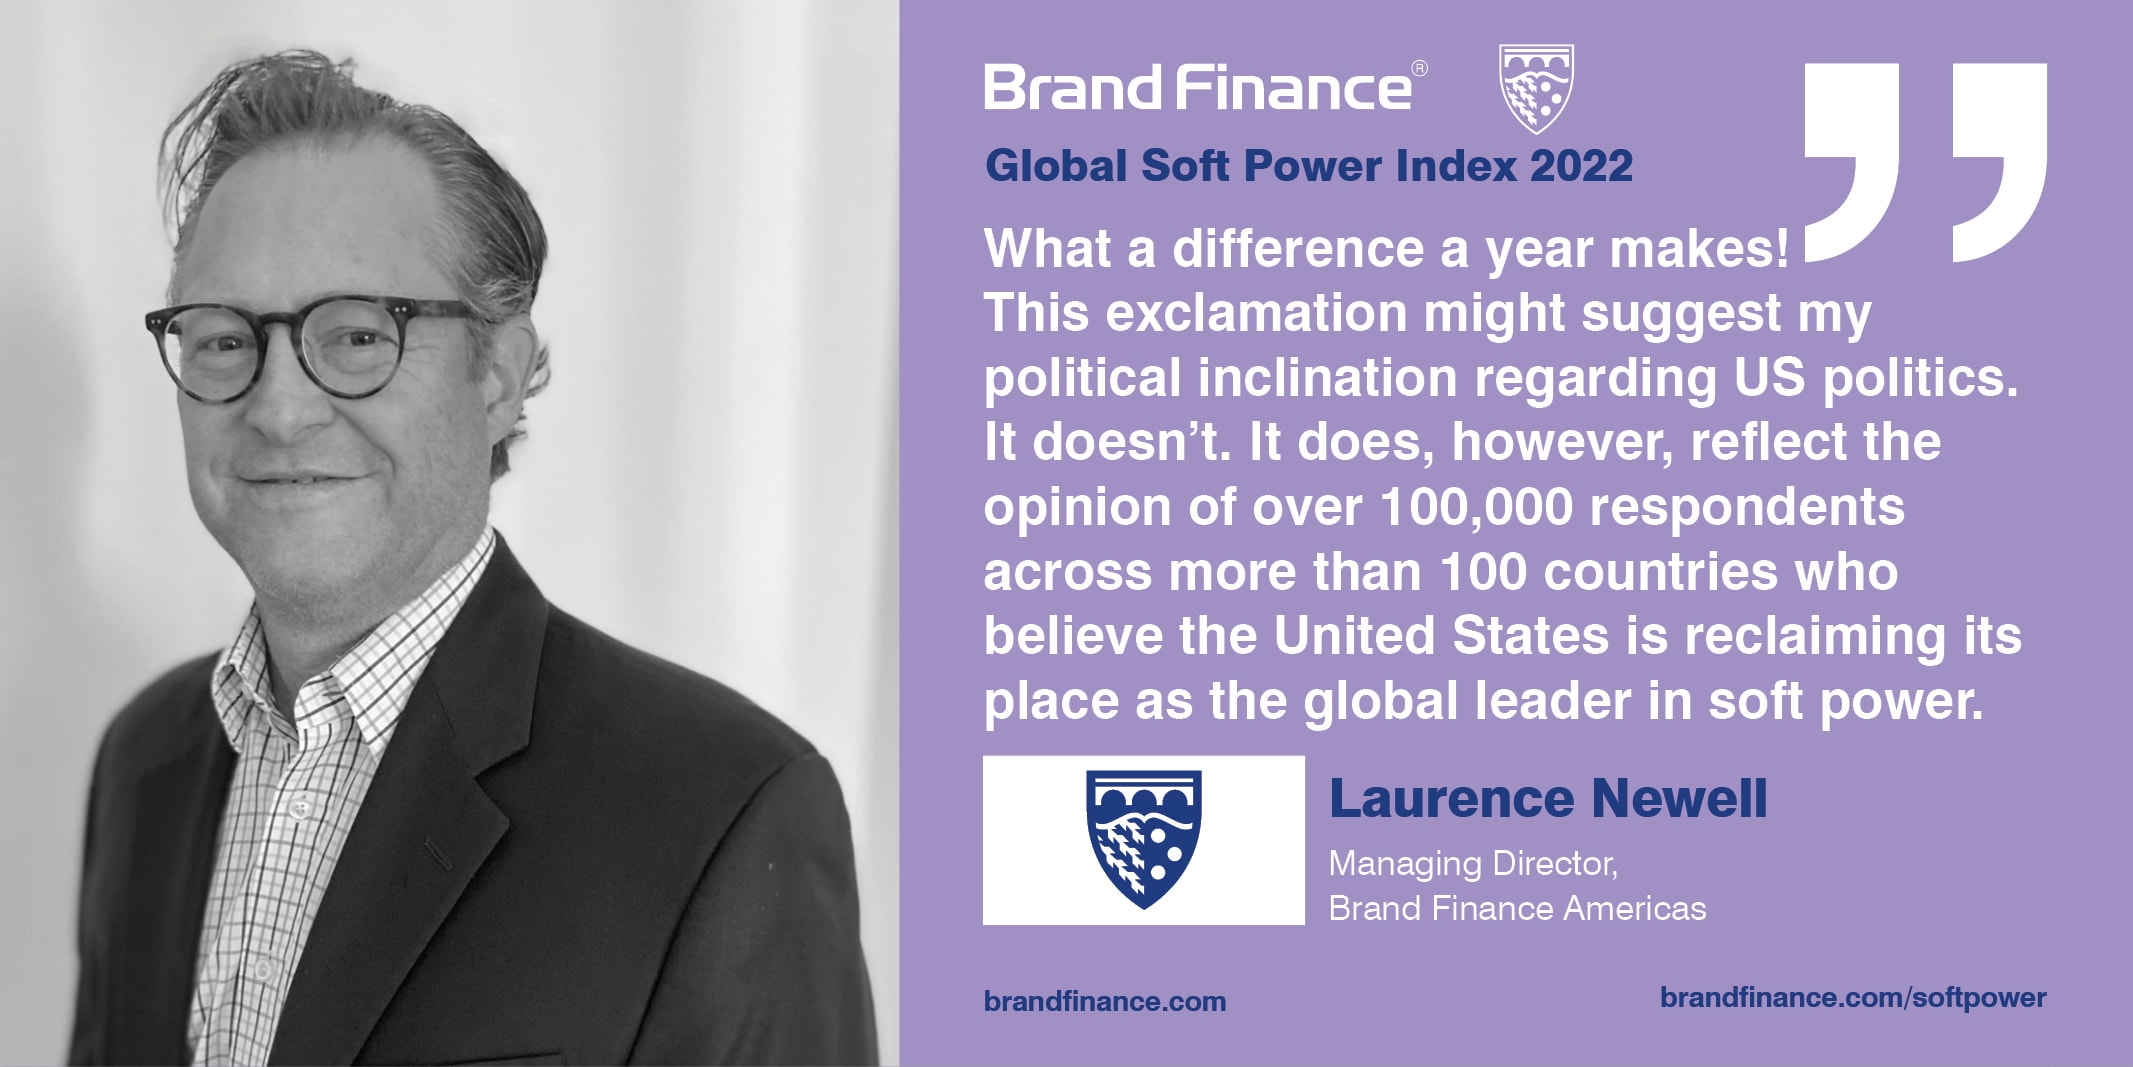 Laurence Newell, Managing Director, Brand Finance Americas